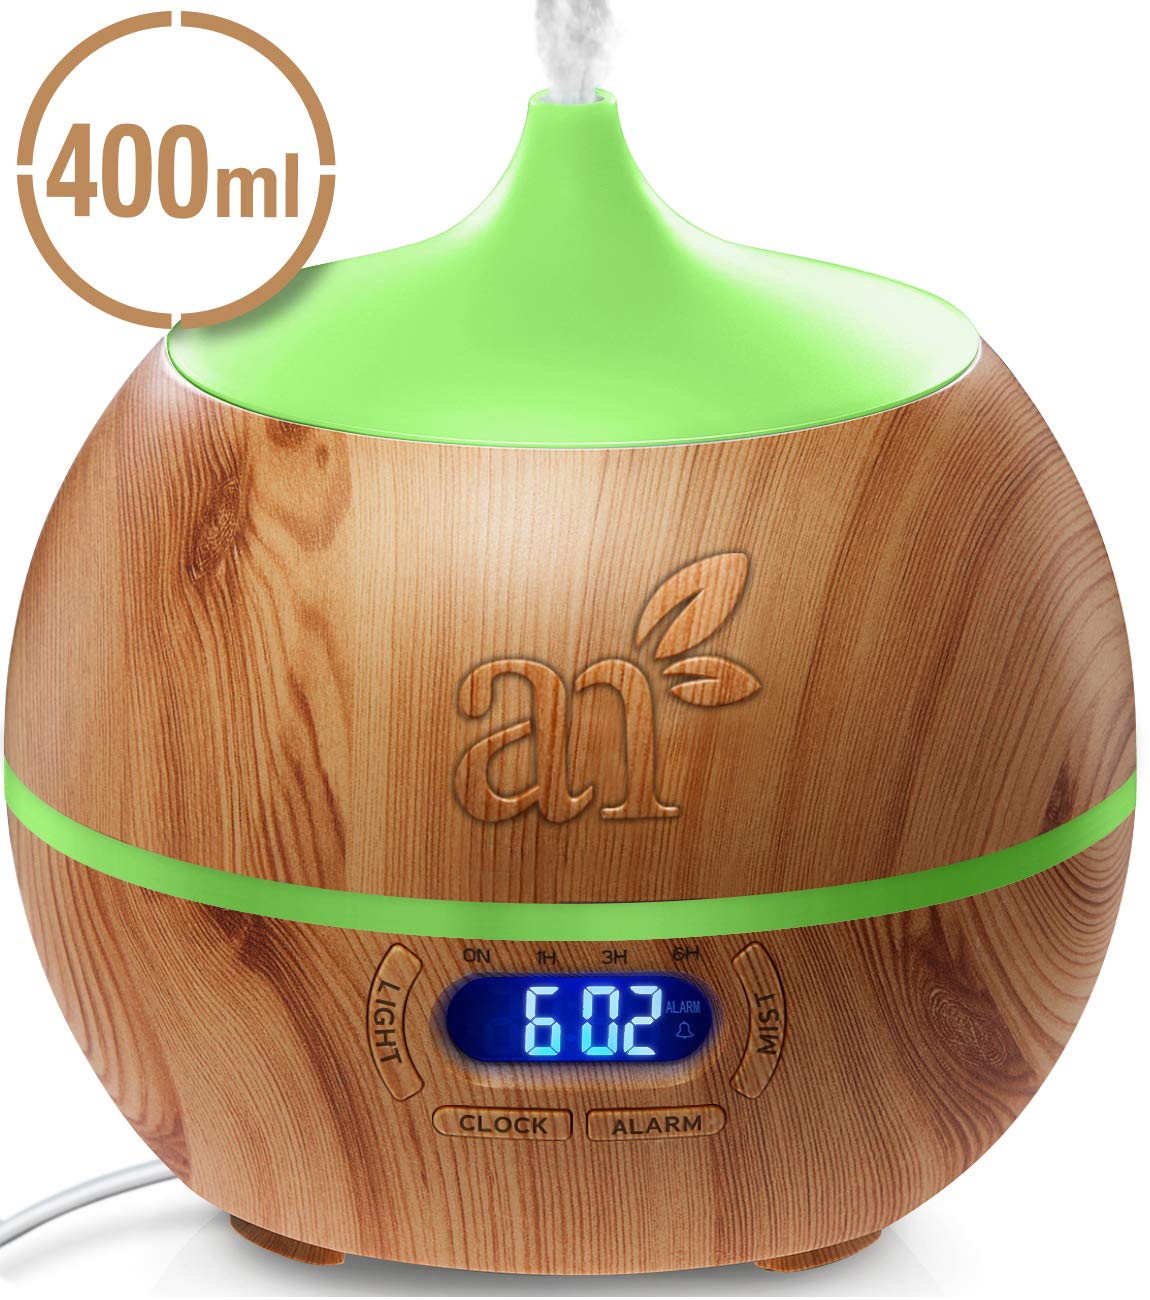 Essential Oil Diffuser and Humidifier with Bluetooth Speaker Clock $19.95 (REG $34.95)